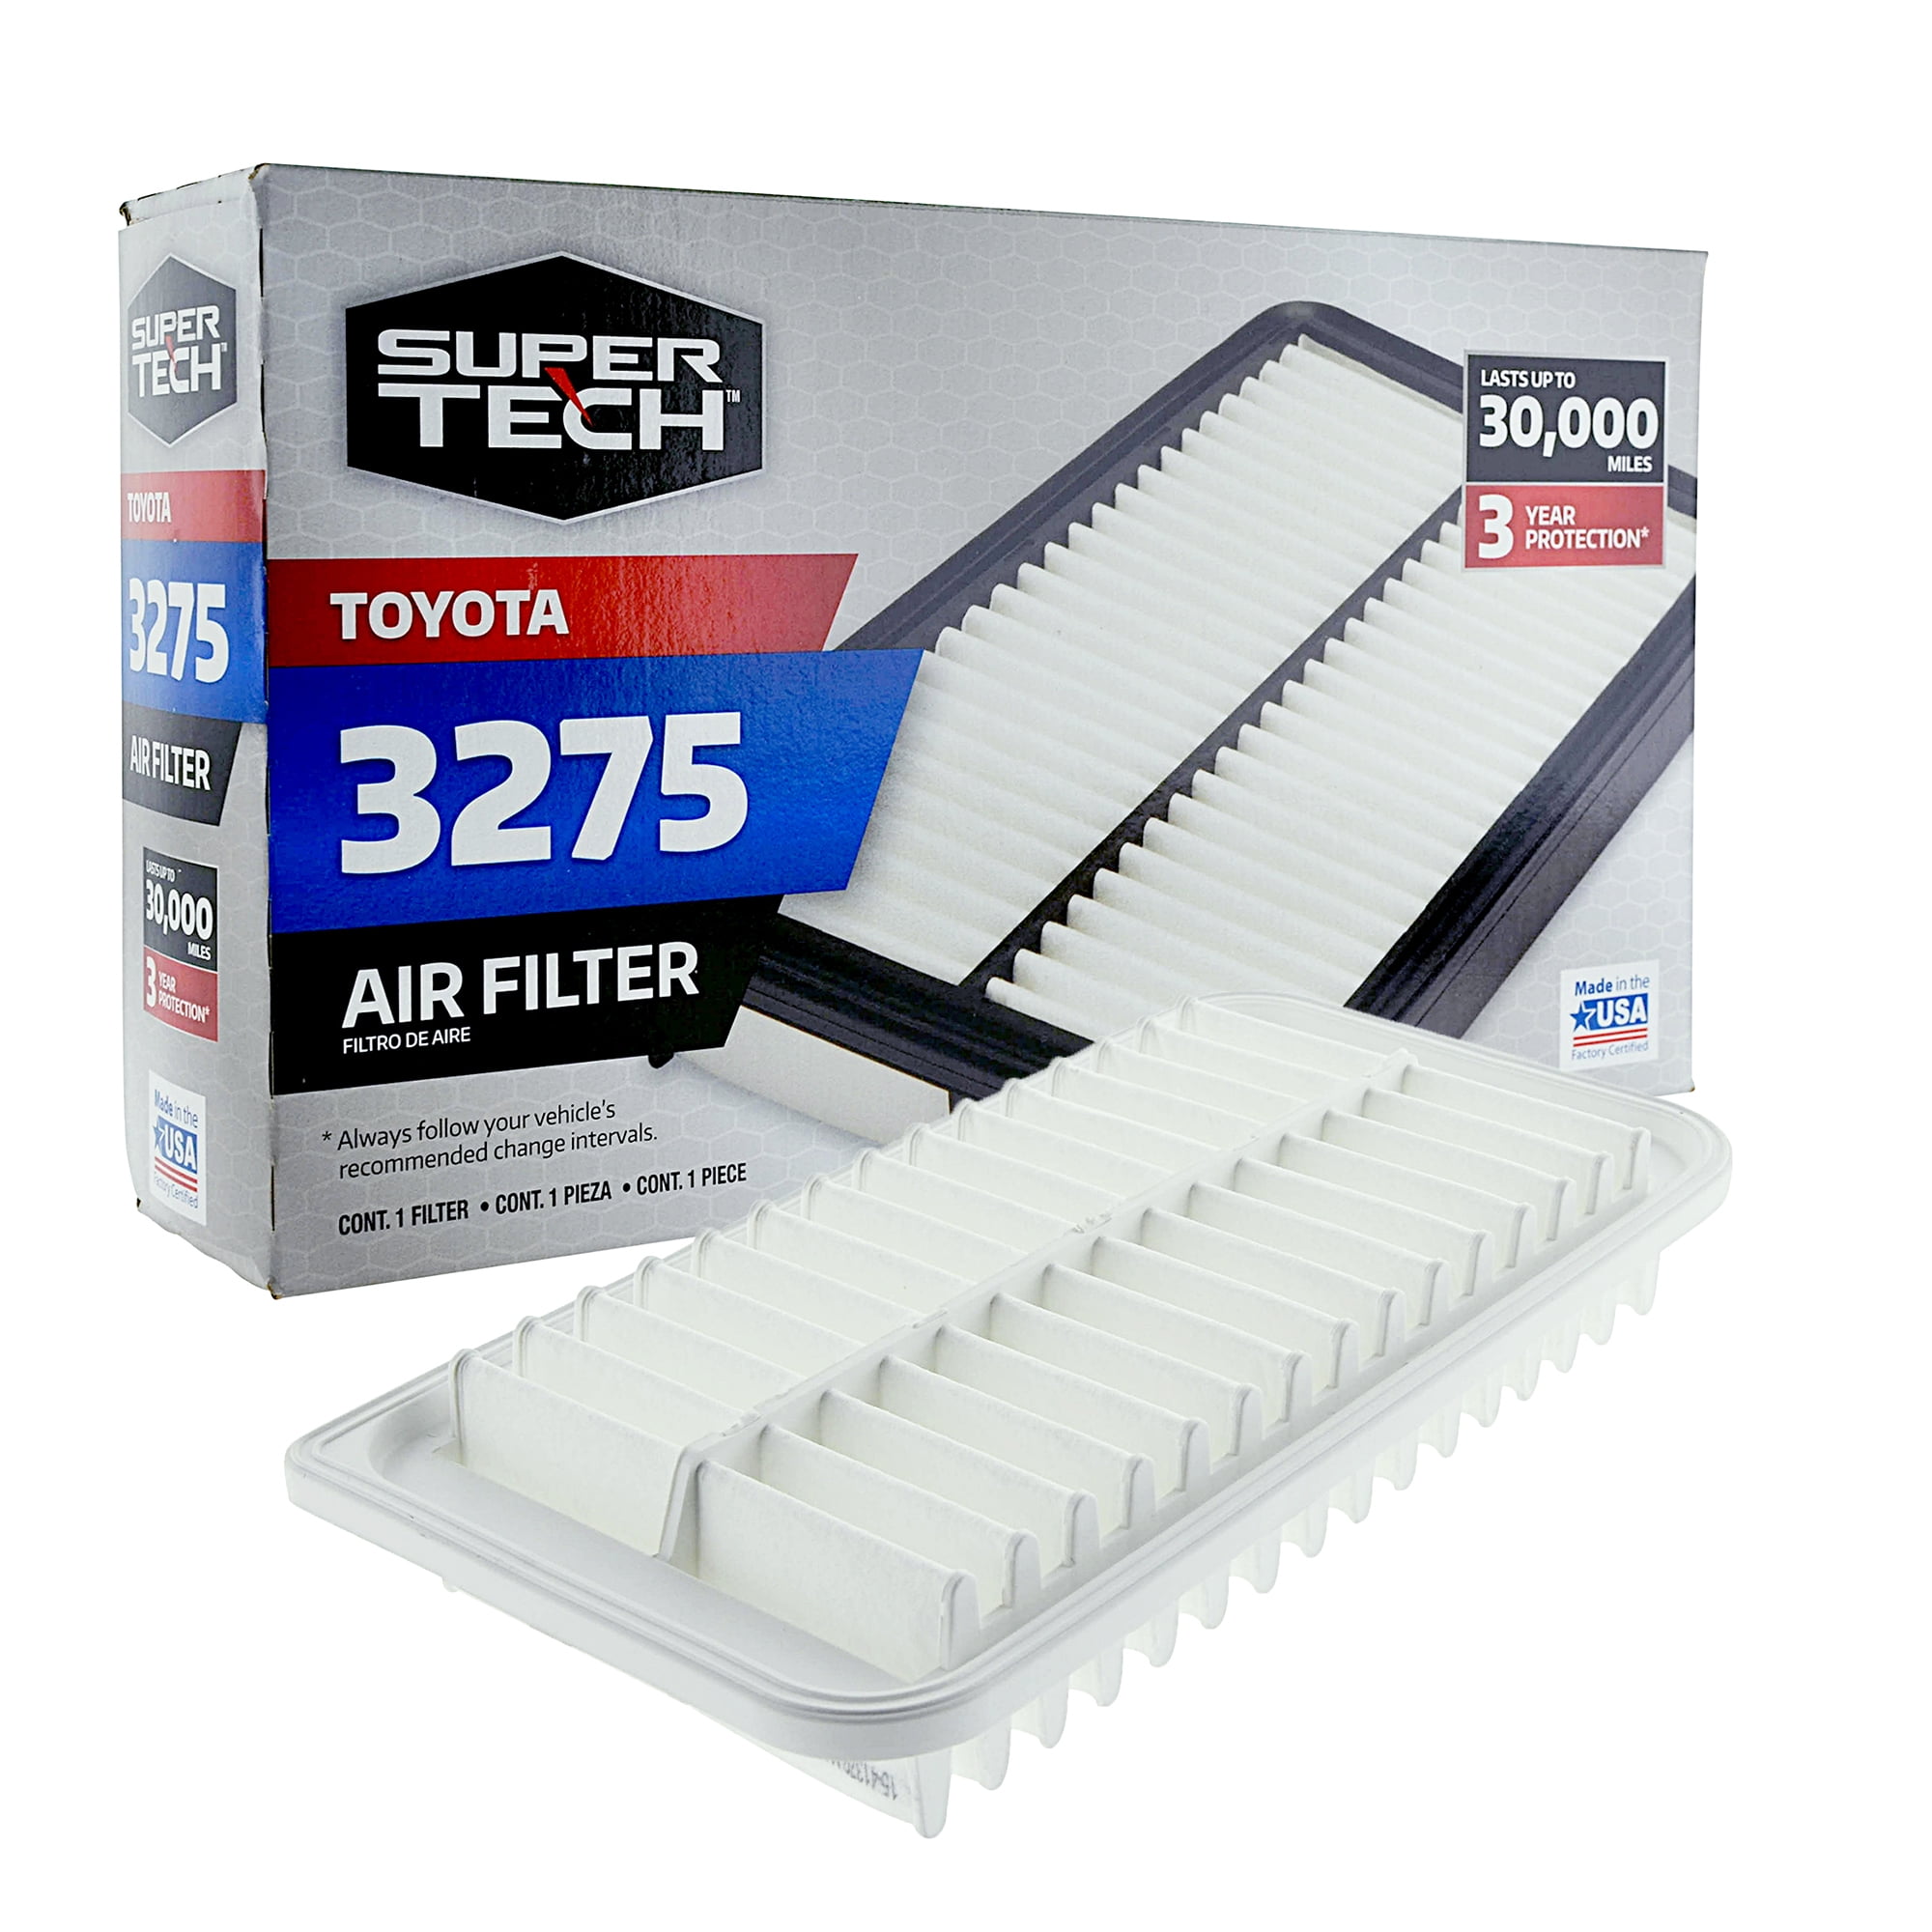 SuperTech 3275 Engine Air Filter, Replacement Filter for Toyota